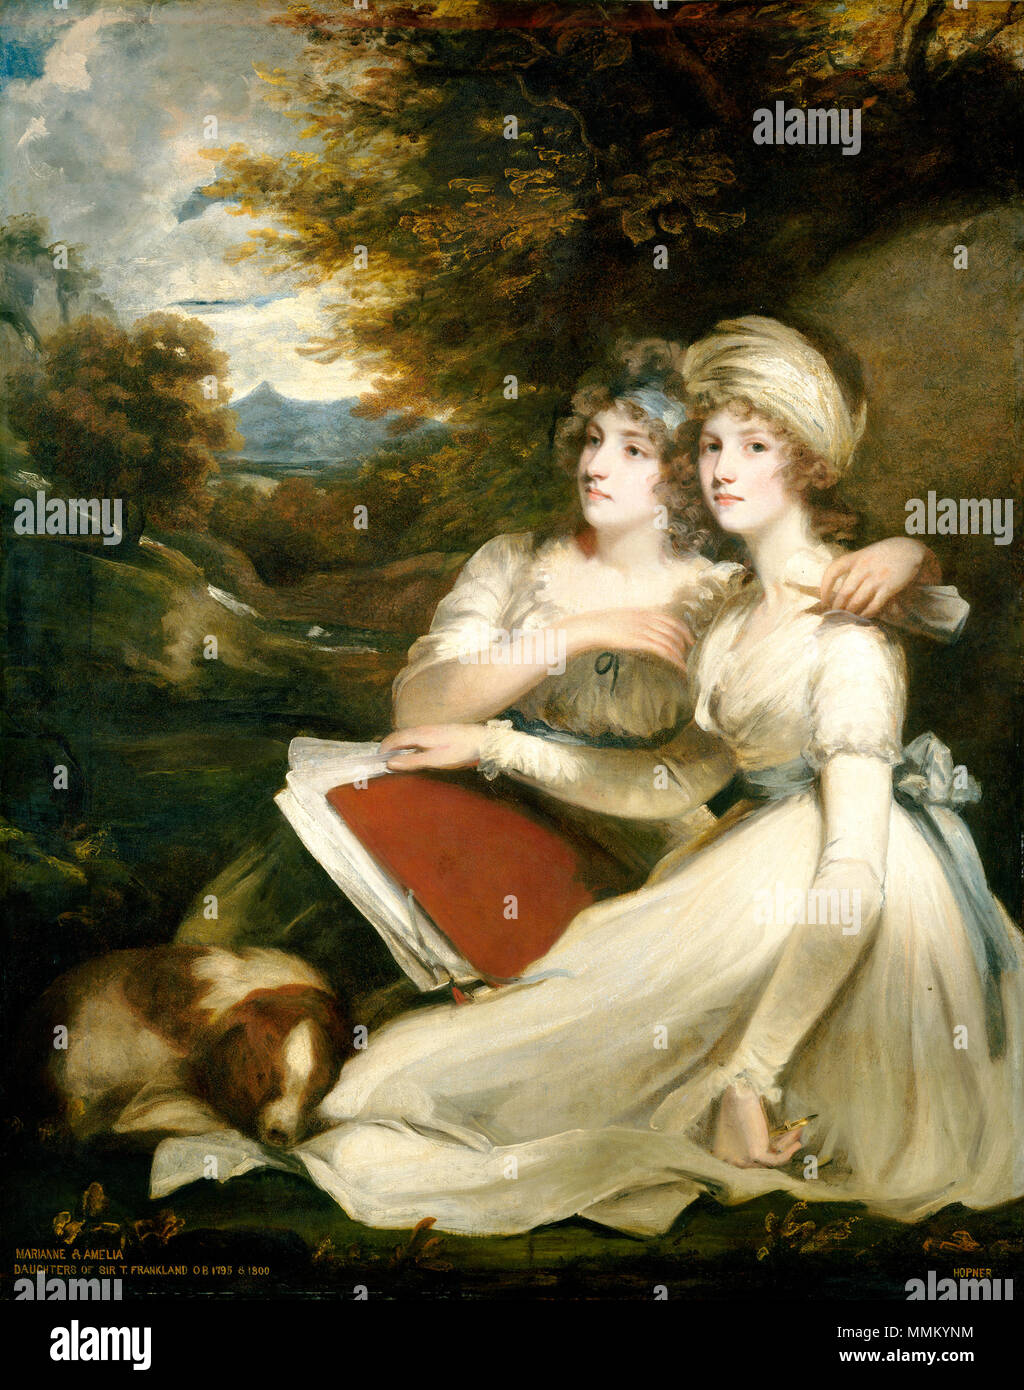 John Hoppner, The Frankland Sisters, British, 1758 - 1810, 1795, oil on canvas, Andrew W. Mellon Collection 1795-Frankland-sisters-by-Hoppnet Stock Photo